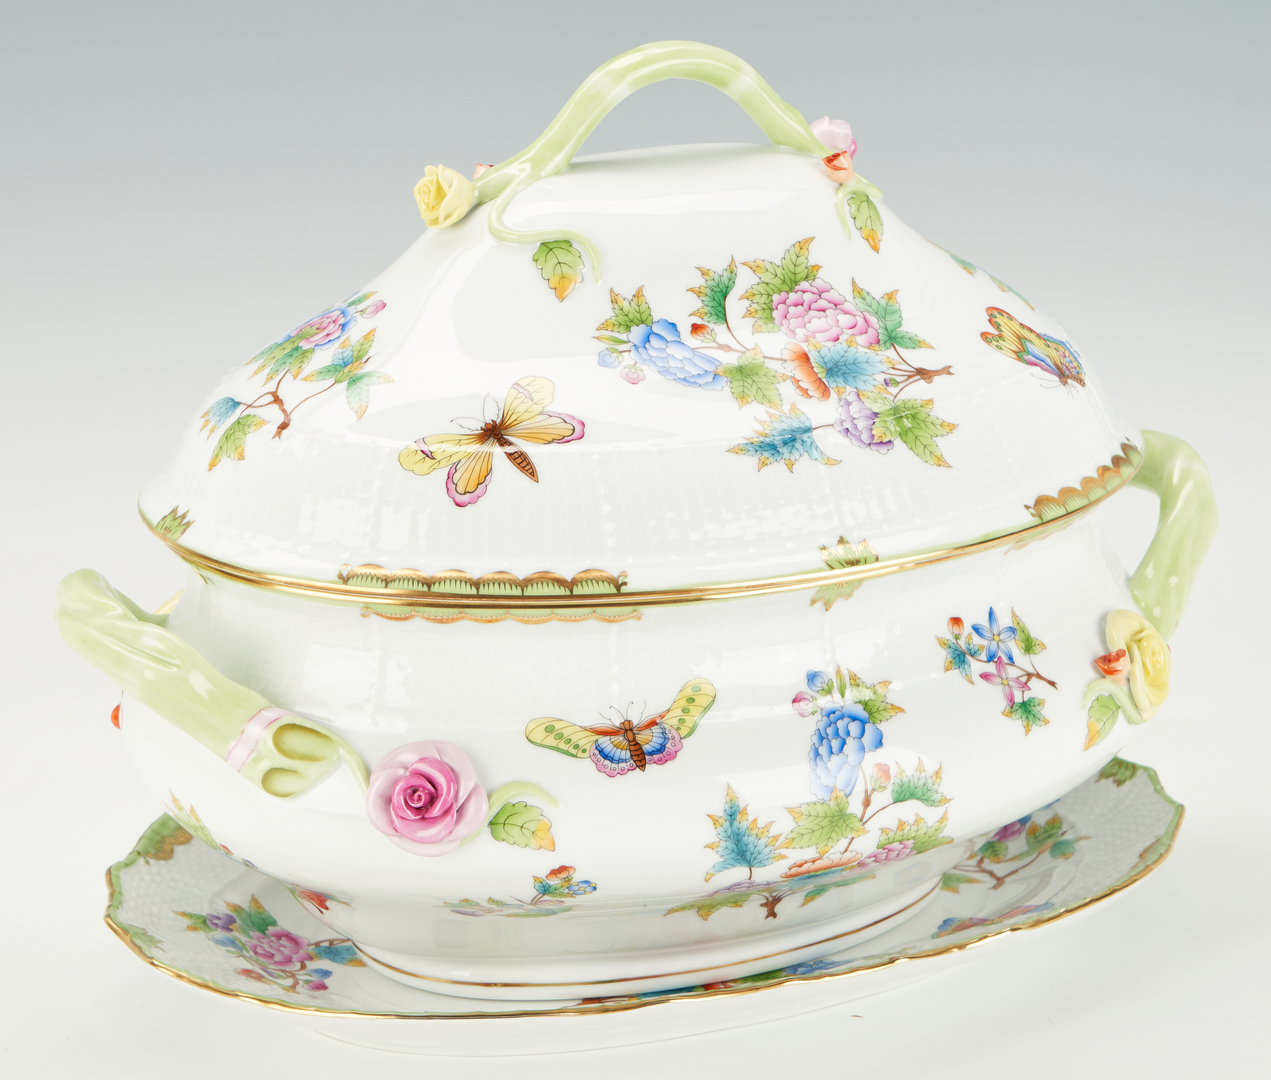 Lot 943: Herend Queen Victoria Tureen and Underplate